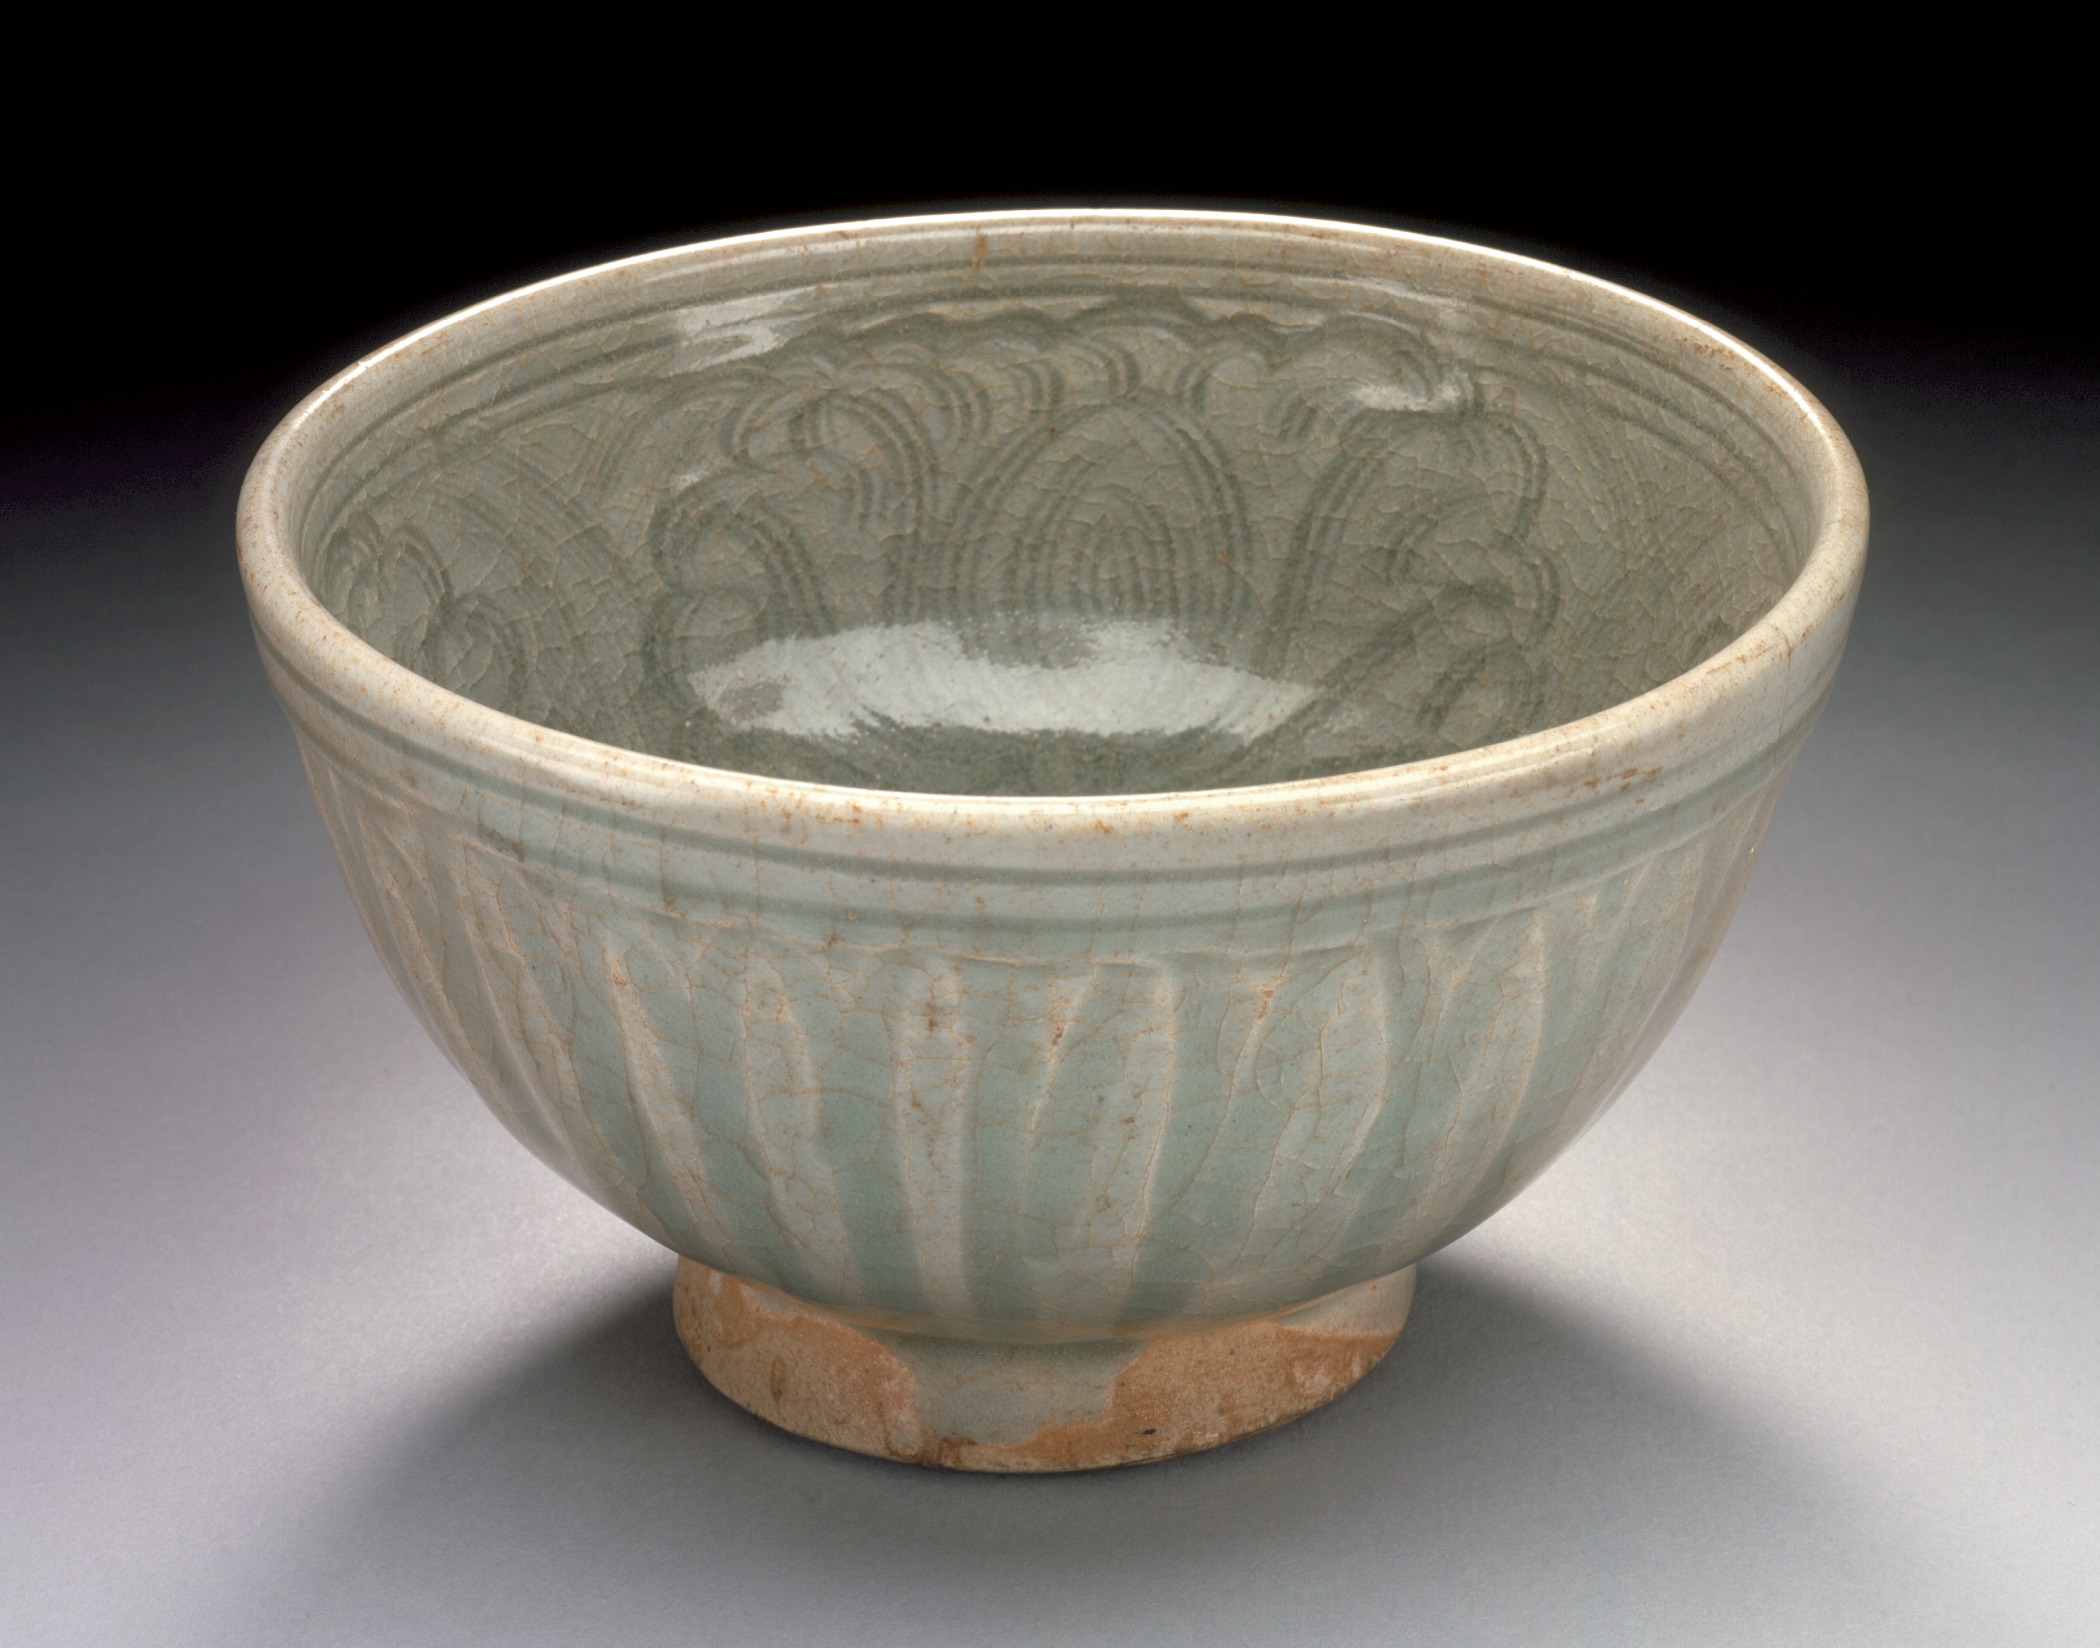 a light green colored bowl with a decorative pattern